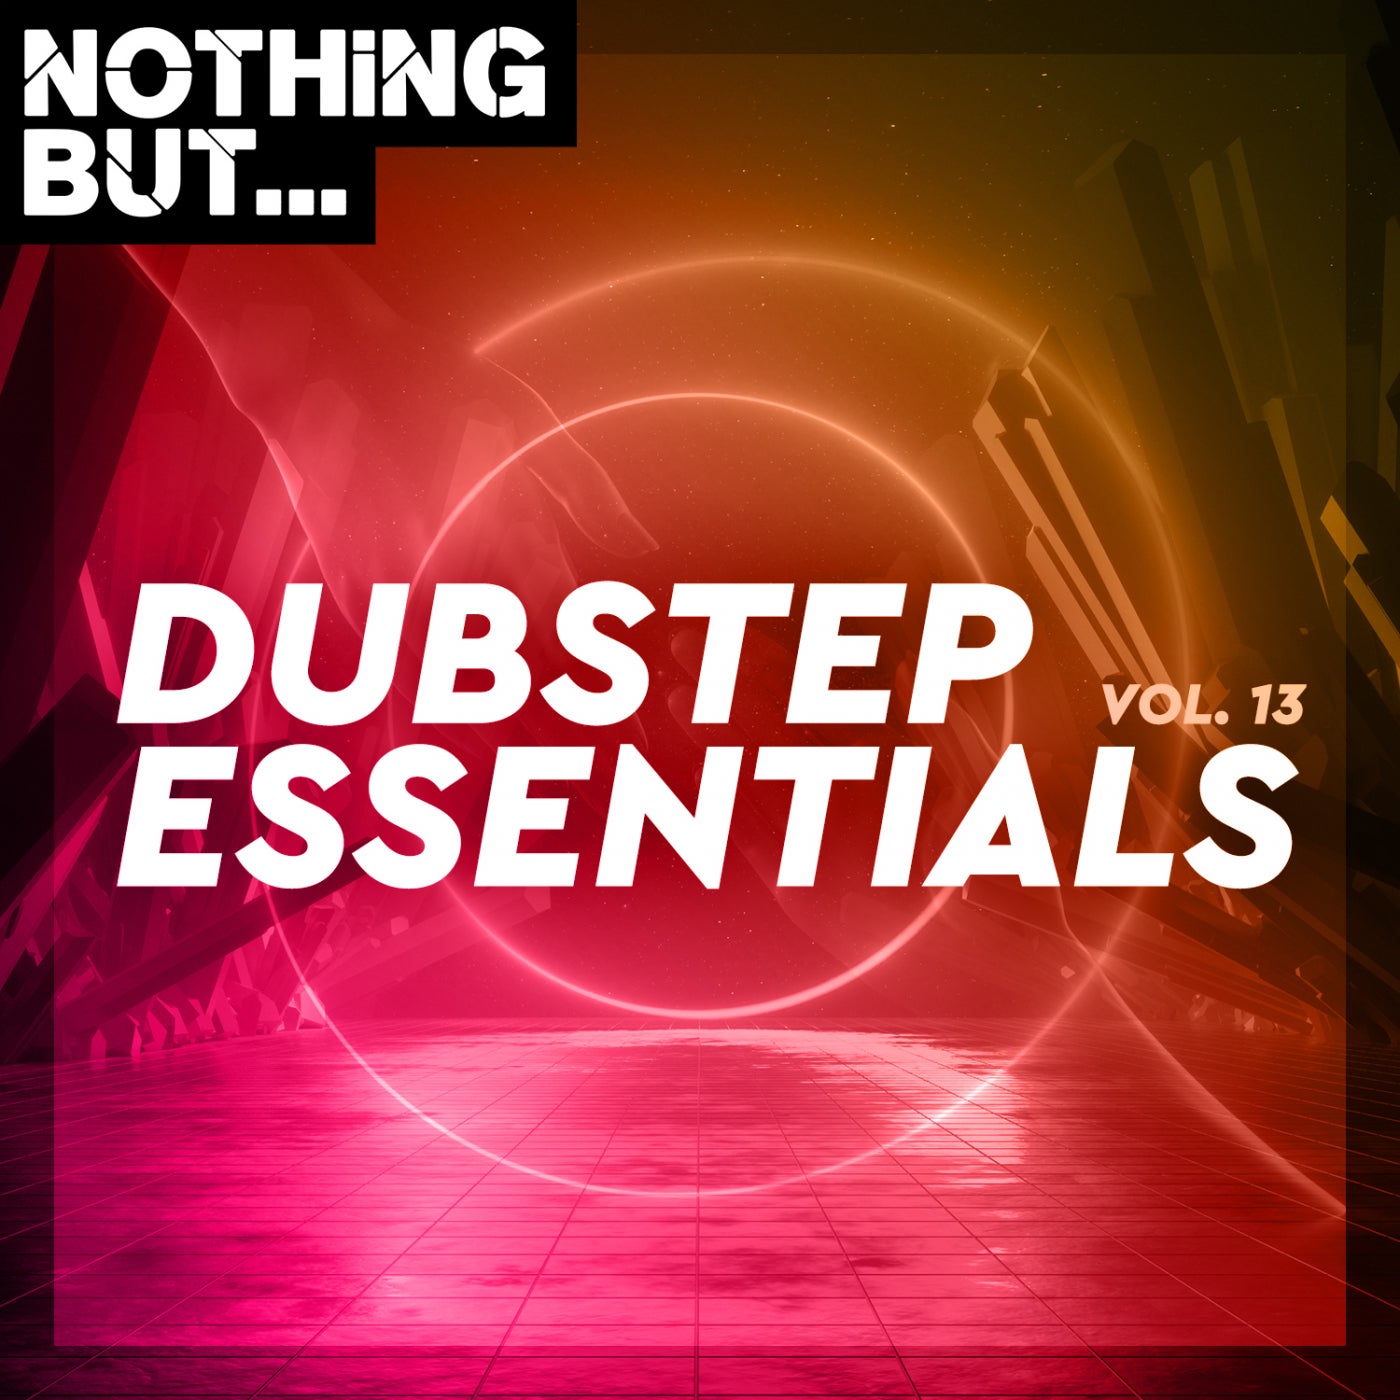 Nothing But... Dubstep Essentials, Vol. 13